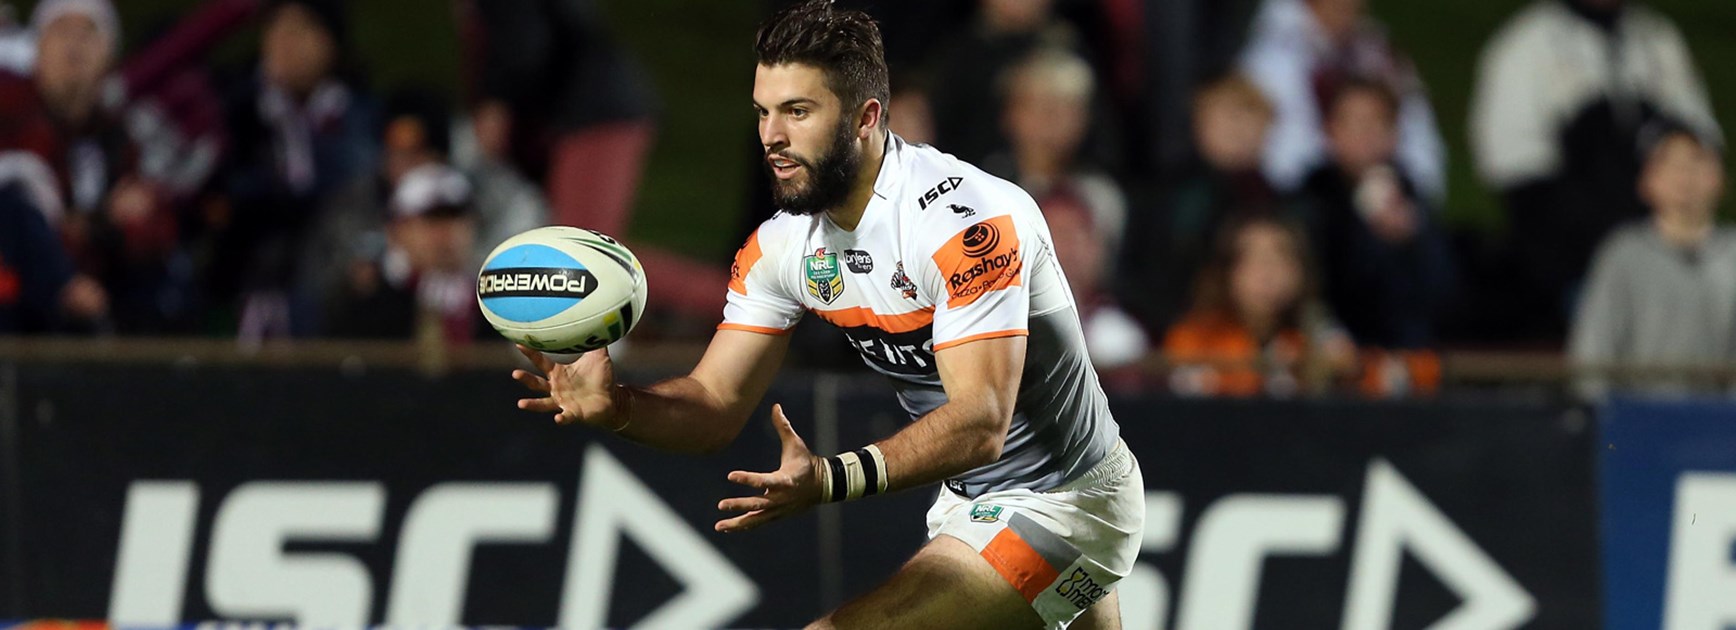 Wests Tigers fullback James Tedesco in action against the Sea Eagles at Brookvale Oval.